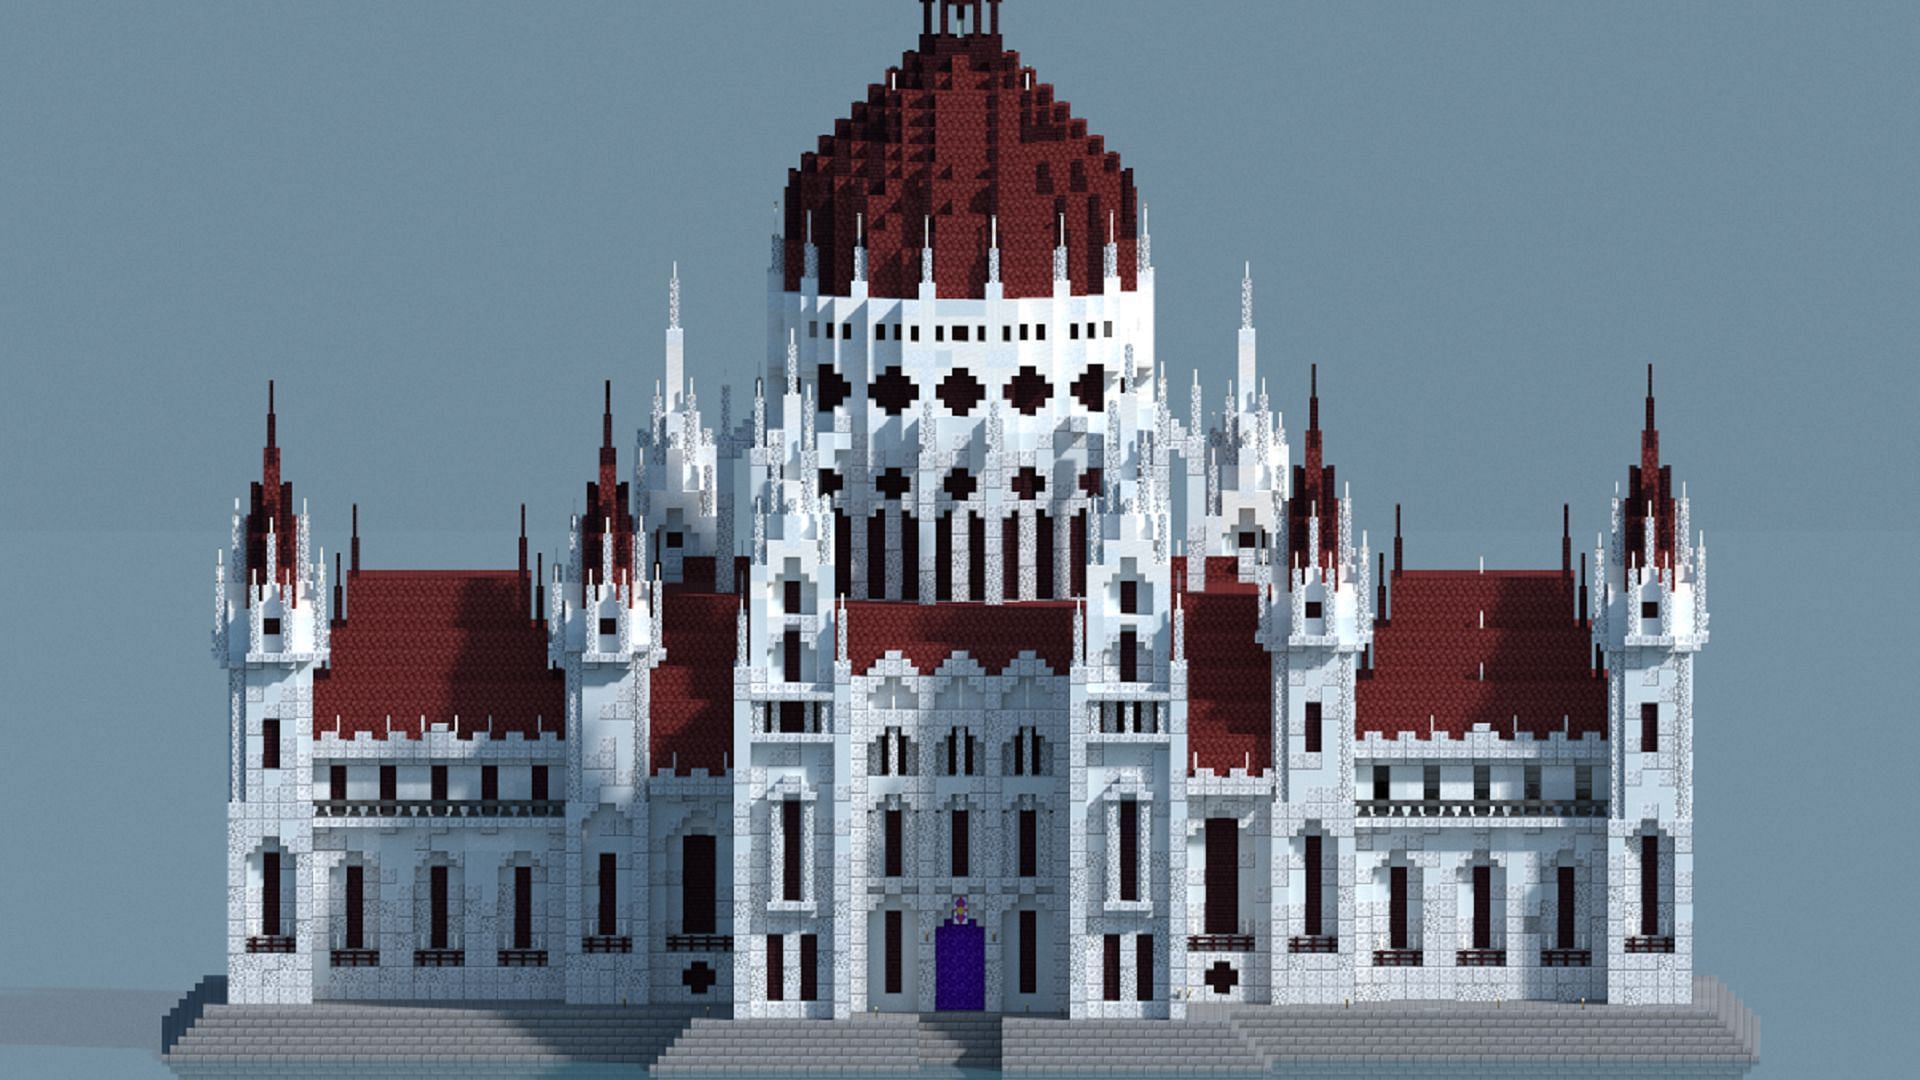 One of the key government buildings in Budapest recreated in Minecraft, leading players into the Nether (Image via u/dawwer/Reddit)